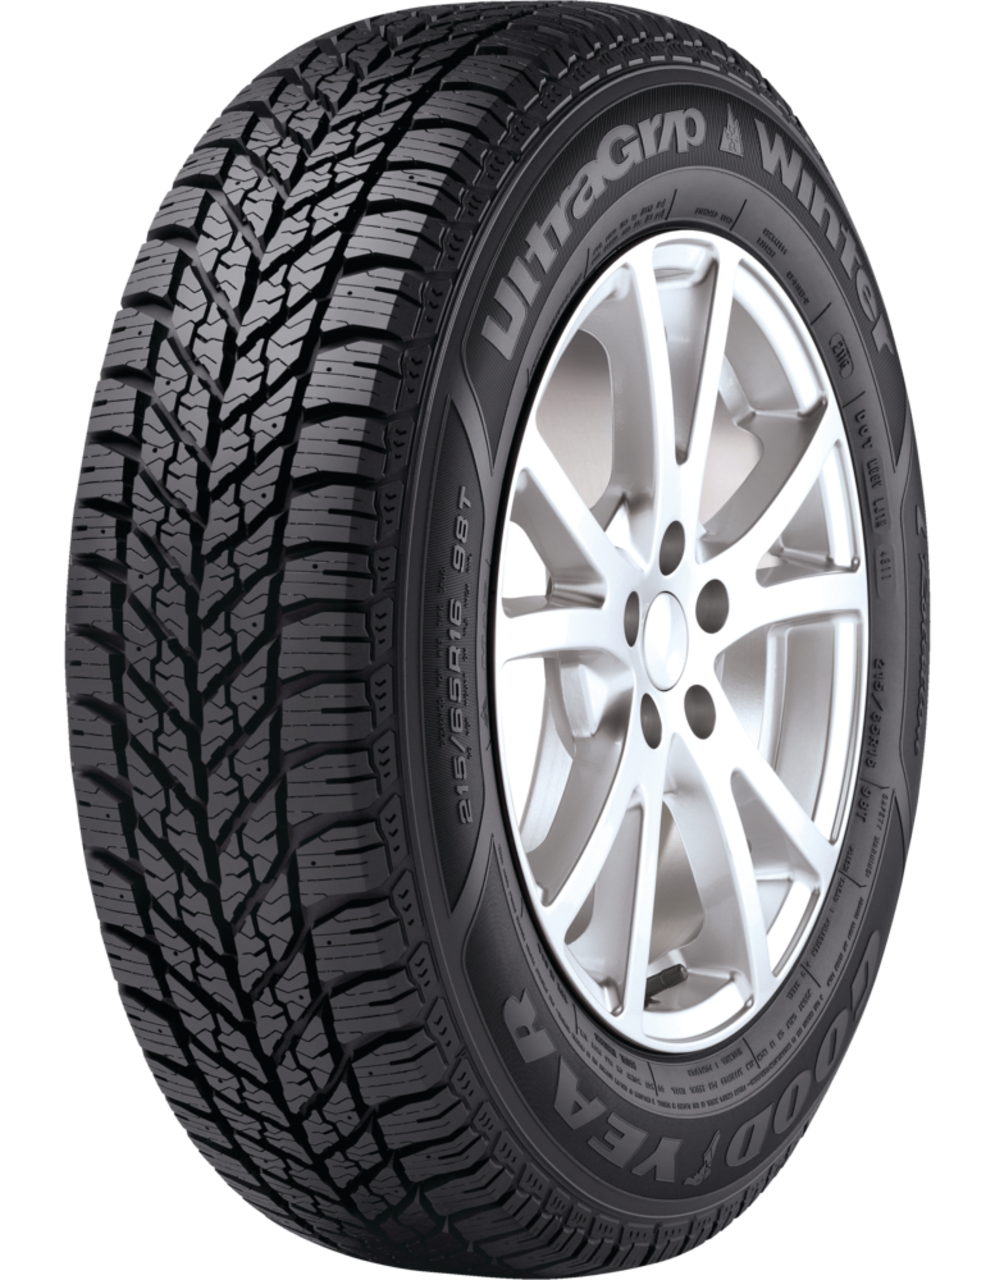 Goodyear Ultra Grip Studdable Winter Tire For Truck & SUV